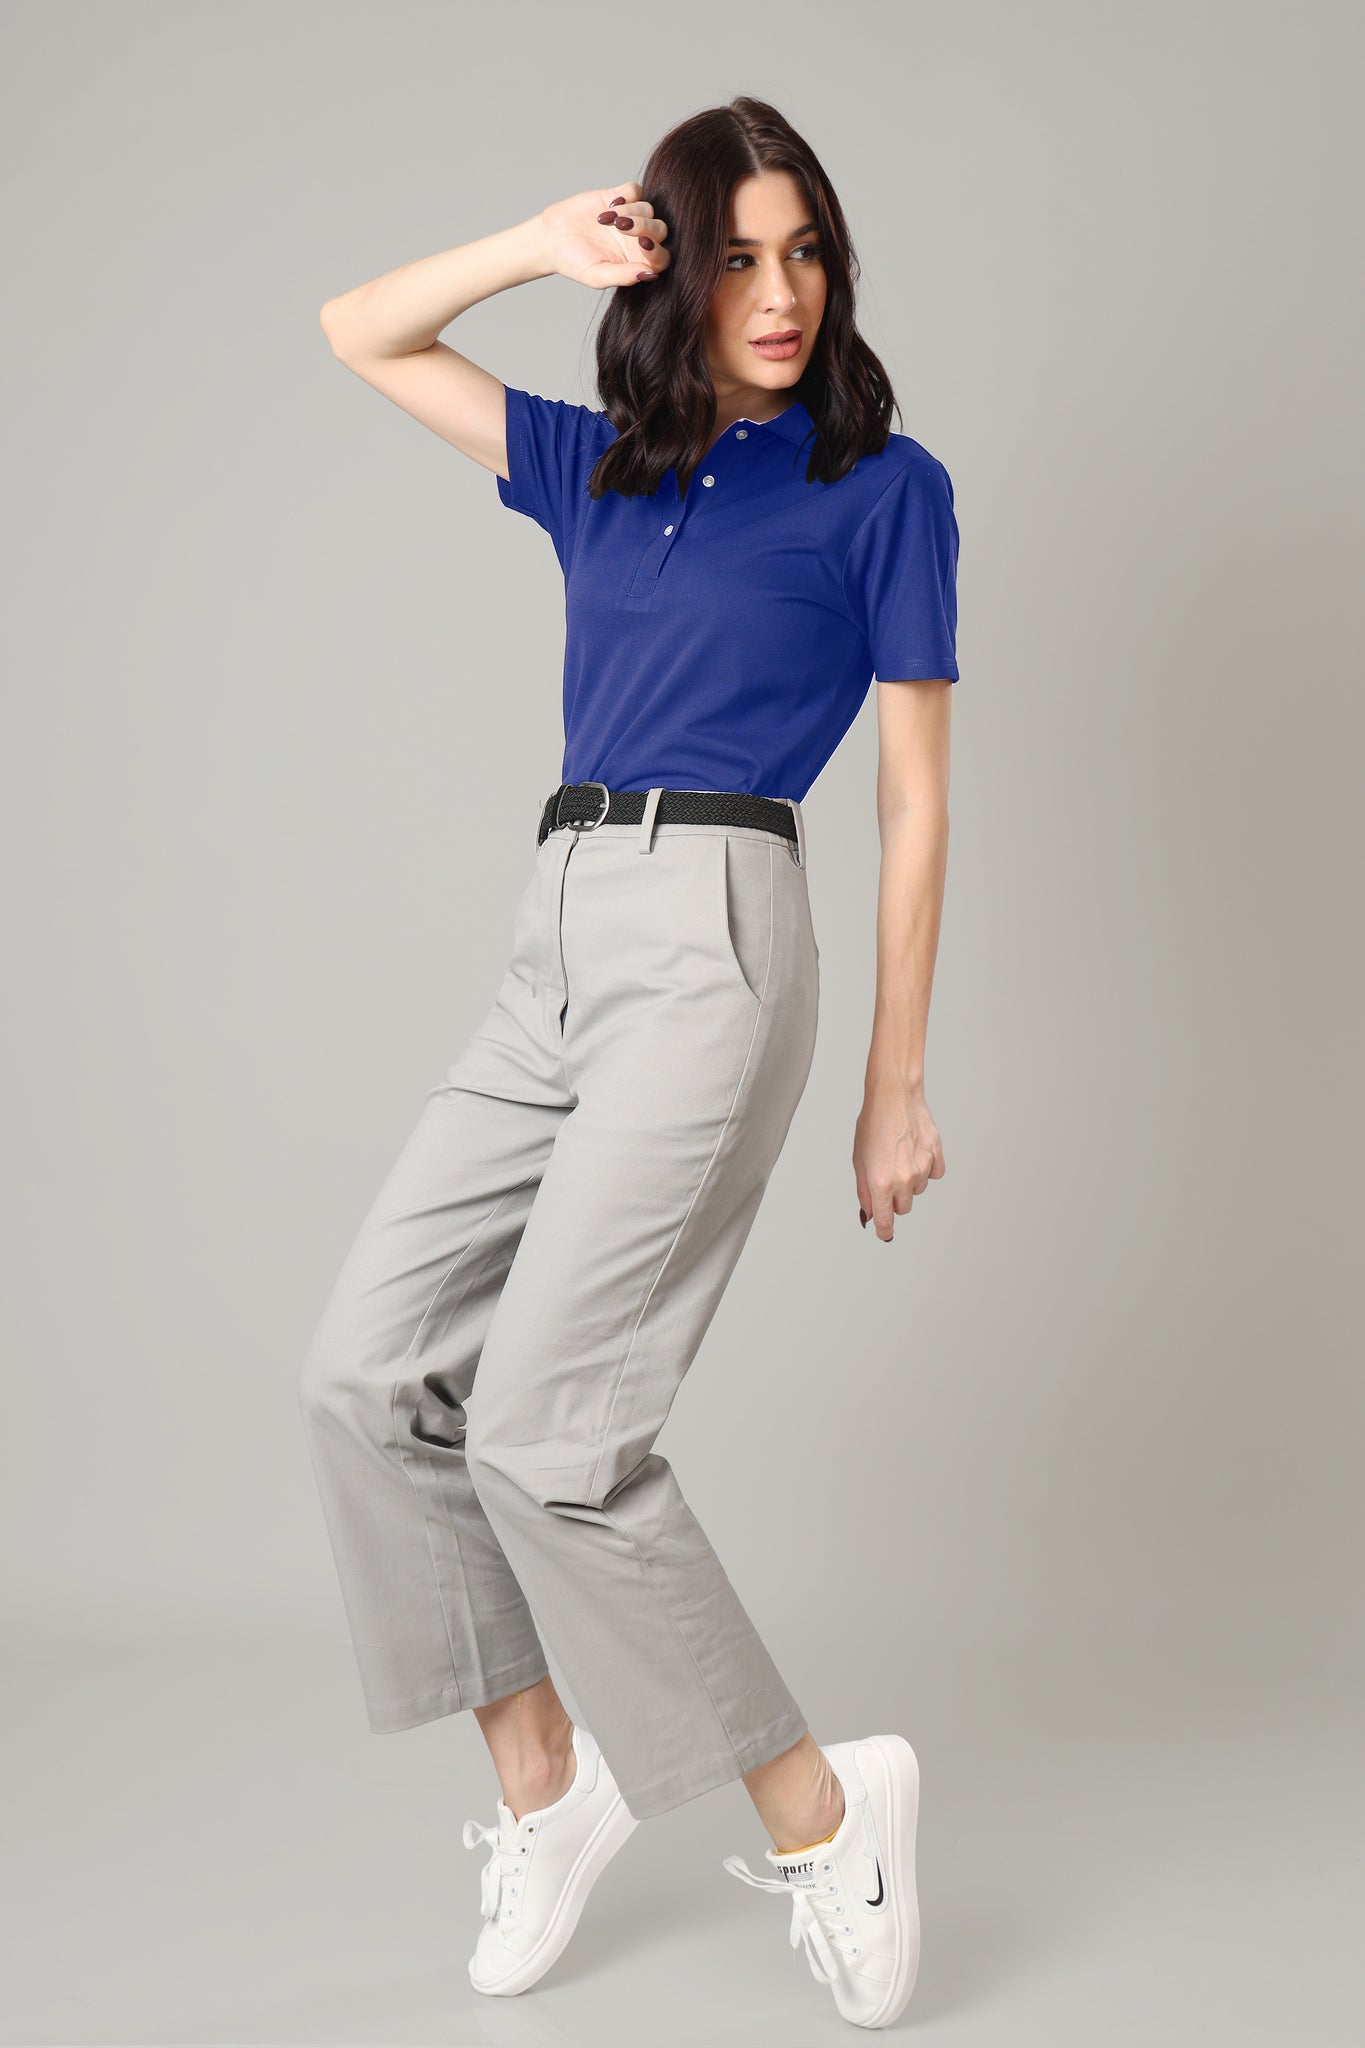 Exclusive Royal Blue Polo T-Shirt For Women